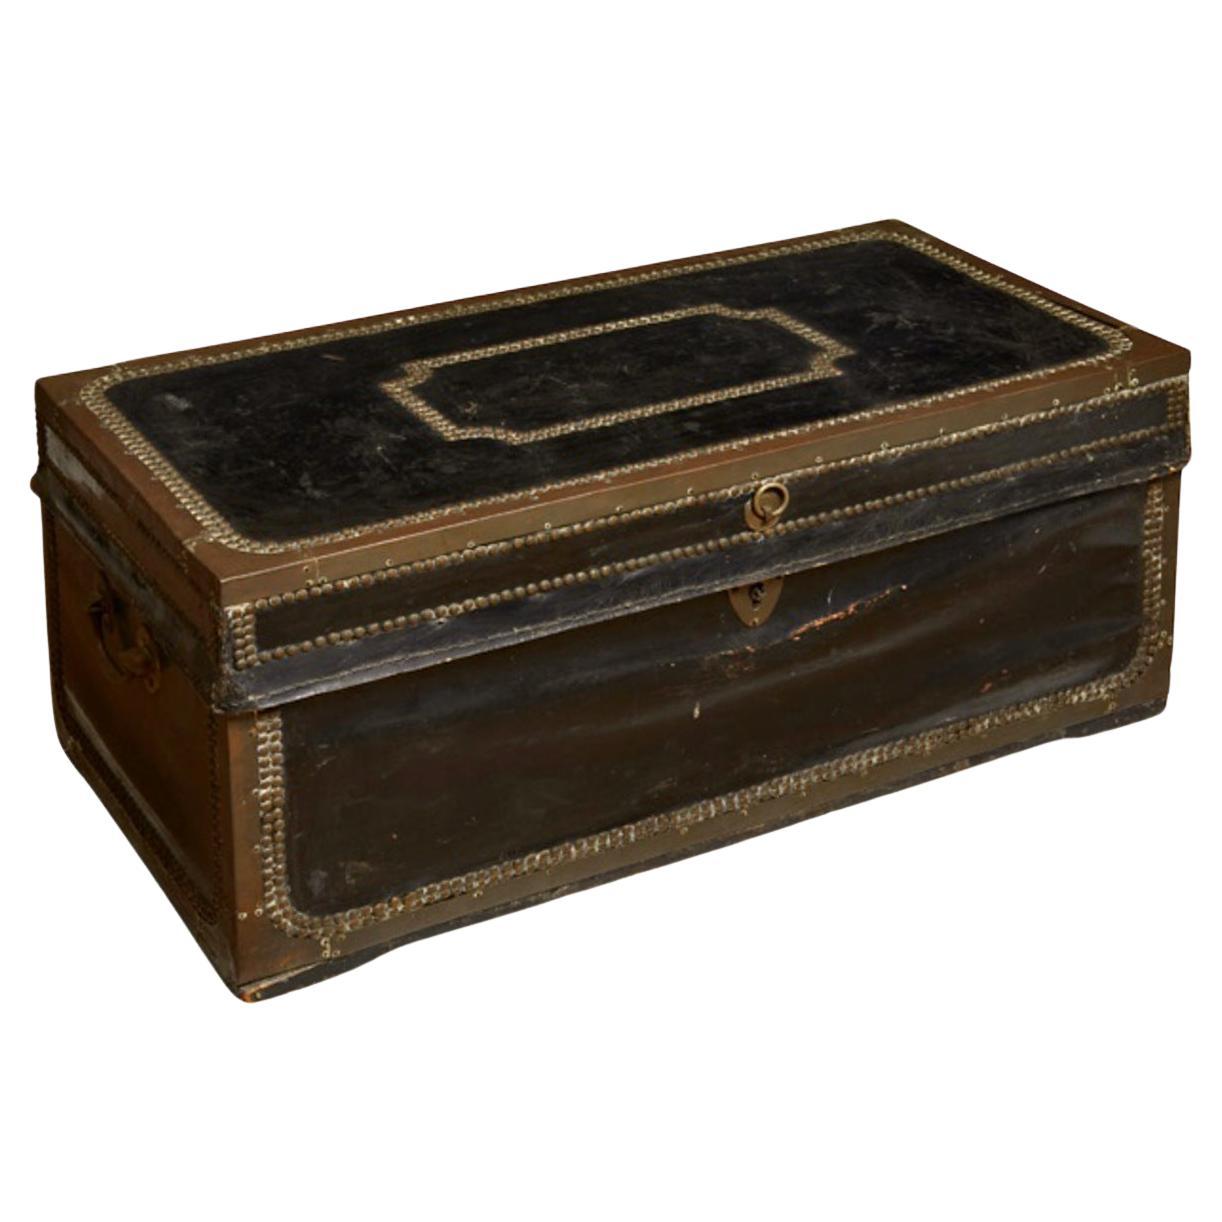 English Leather Bound Campaign Trunk, c. 1820-1830 In Good Condition For Sale In Pasadena, CA